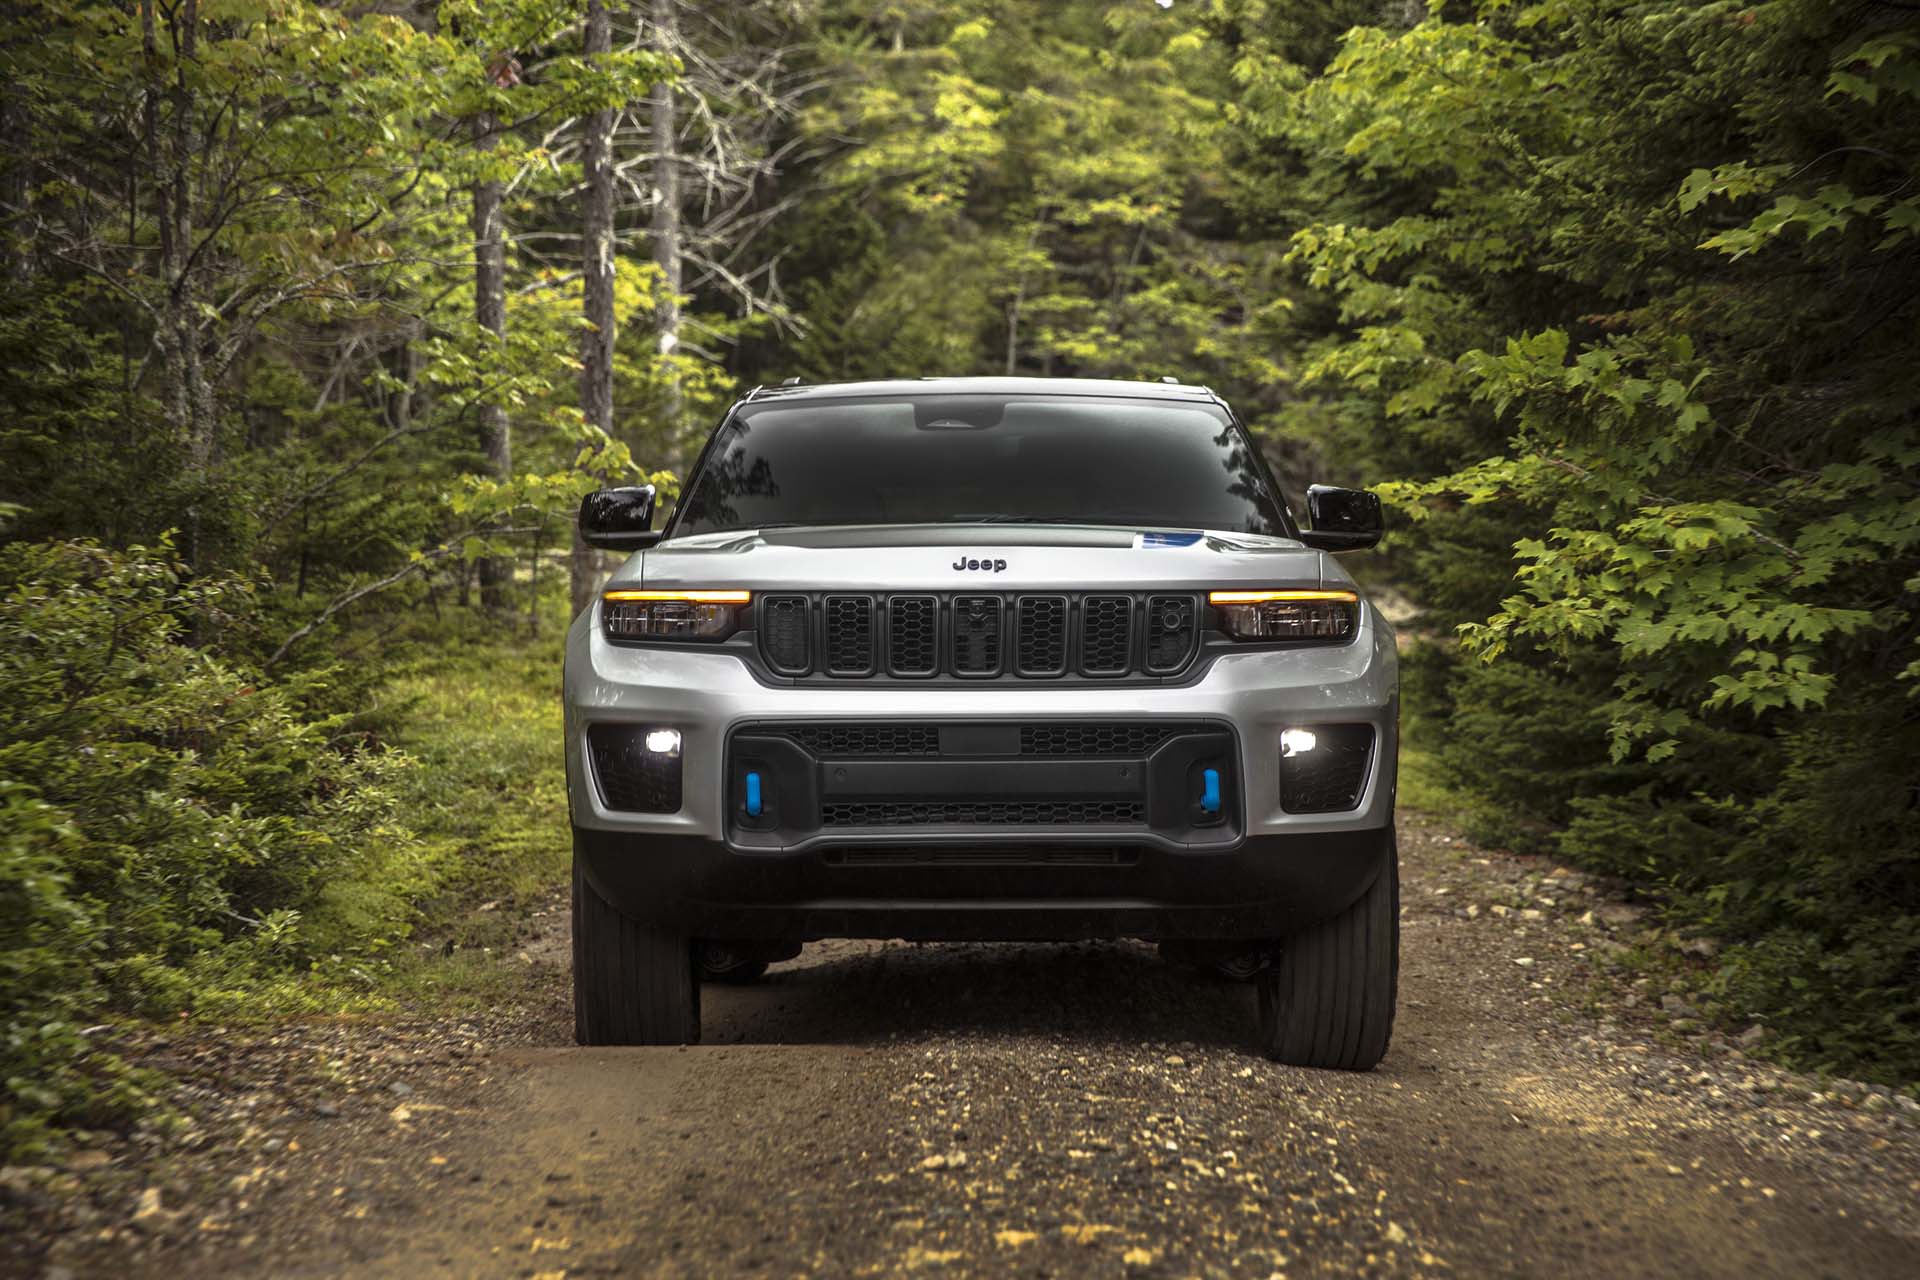 Jeep boss: Grand Cherokee V-8 “part of its DNA,” but its time is limited Auto Recent